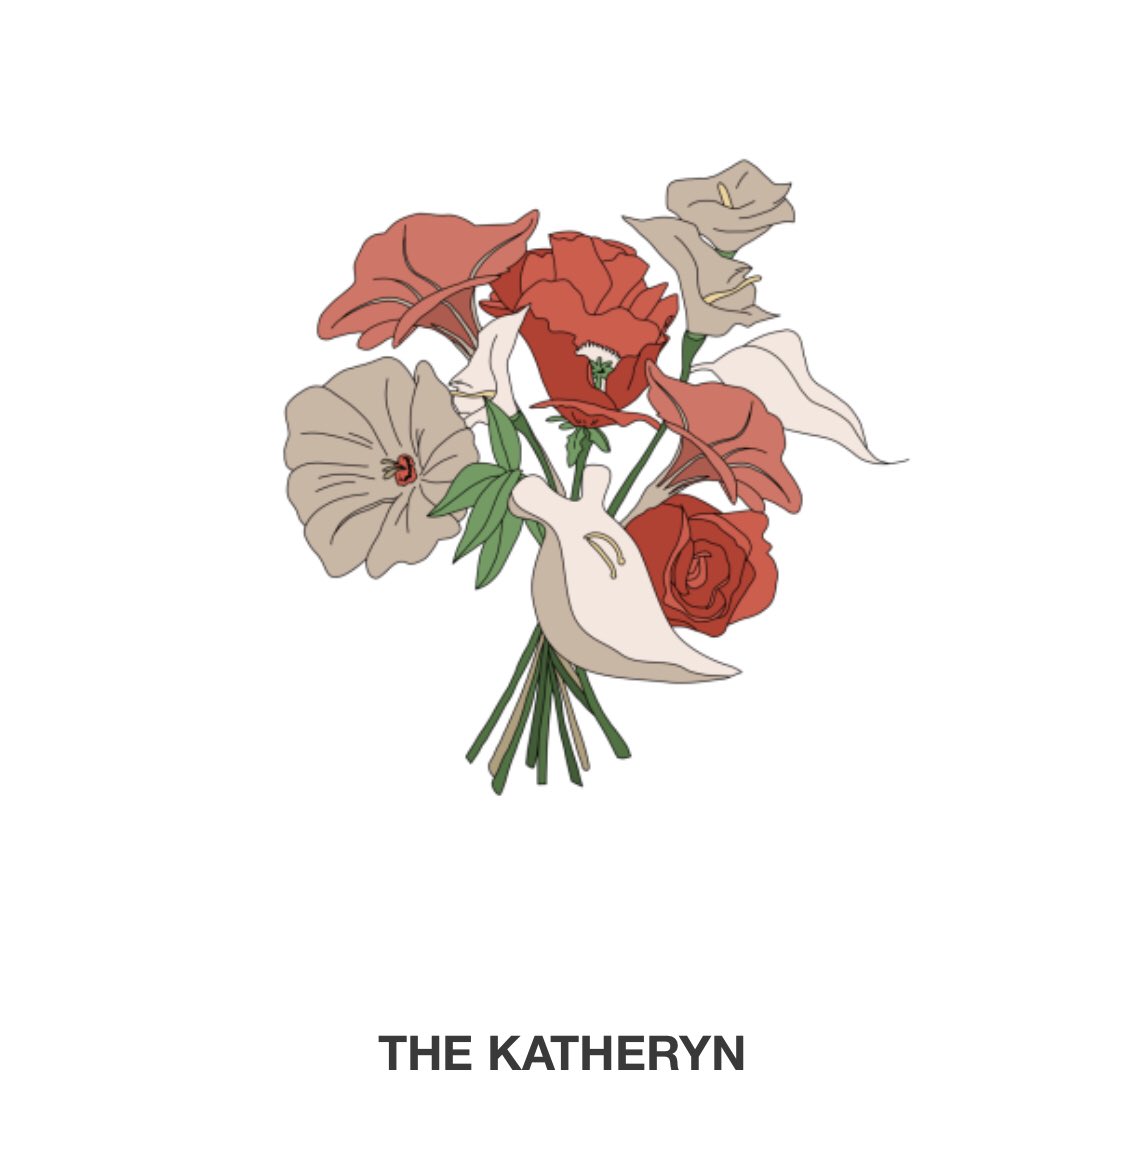 Bouquet: The Katheryn Song represents: What Makes A WomanLyric: “I admire the way you keep the whole world turning”Katy confirmed this song title on a interview, yet the bouquet and the song were not confirmed related it’s only a theory. It’s one of the most anticipated songs